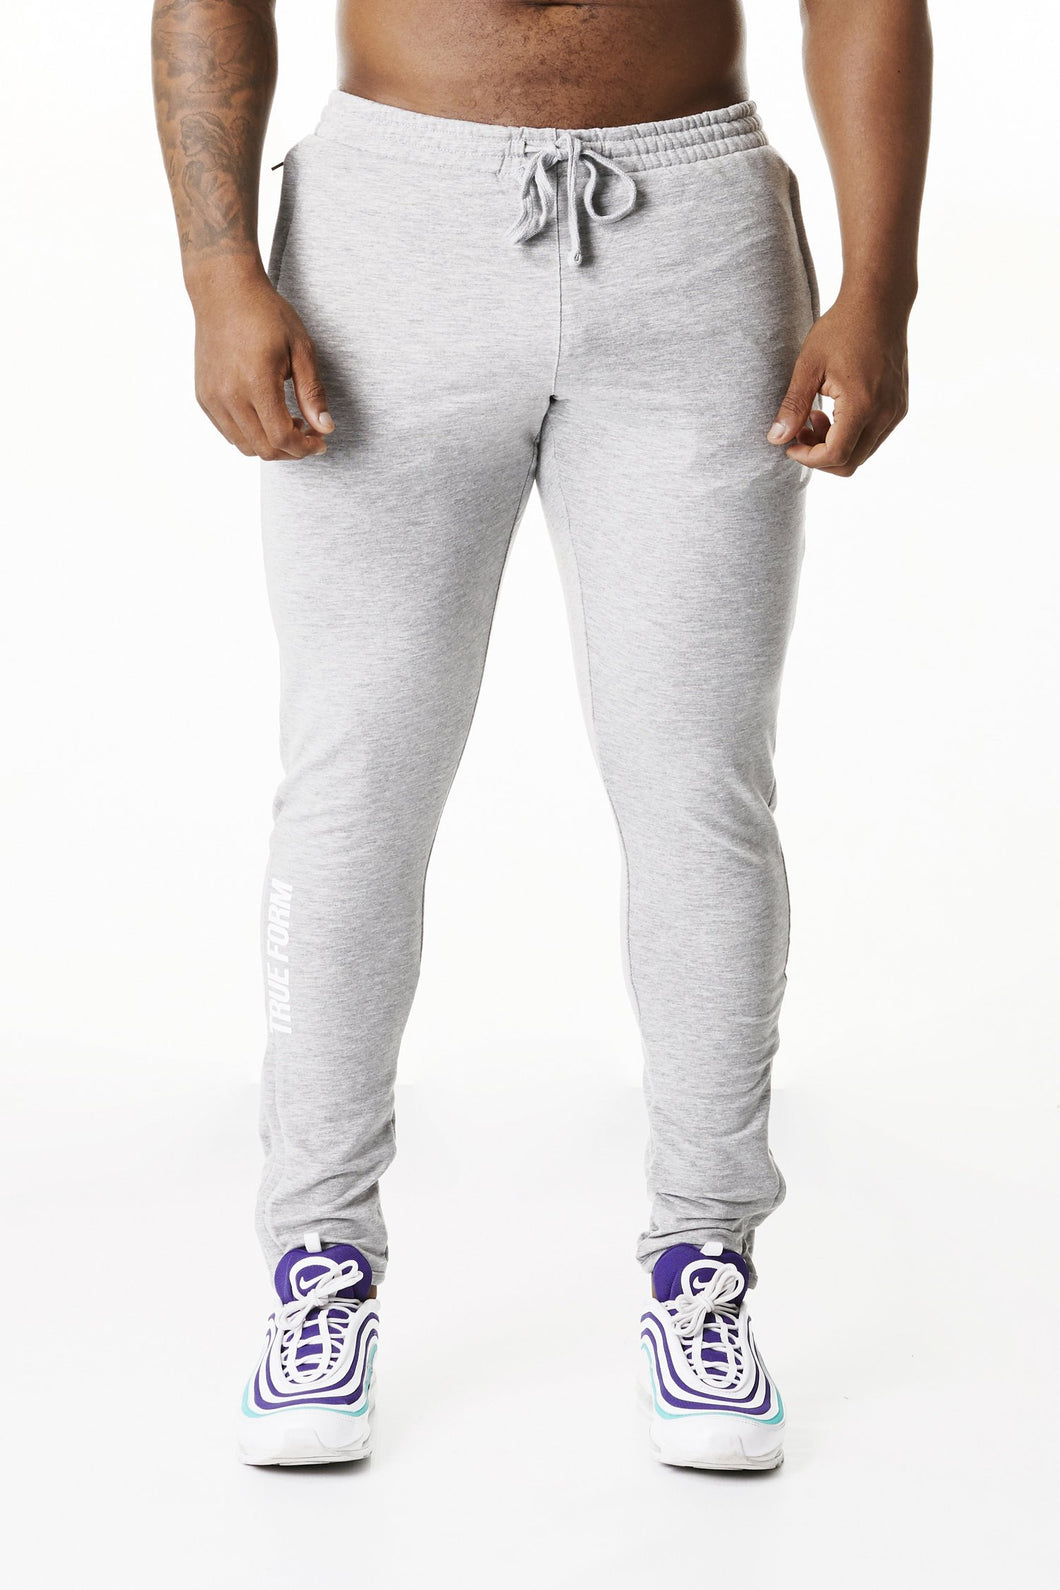 Mens Tapered Statement Joggers for gym wear by true form uk